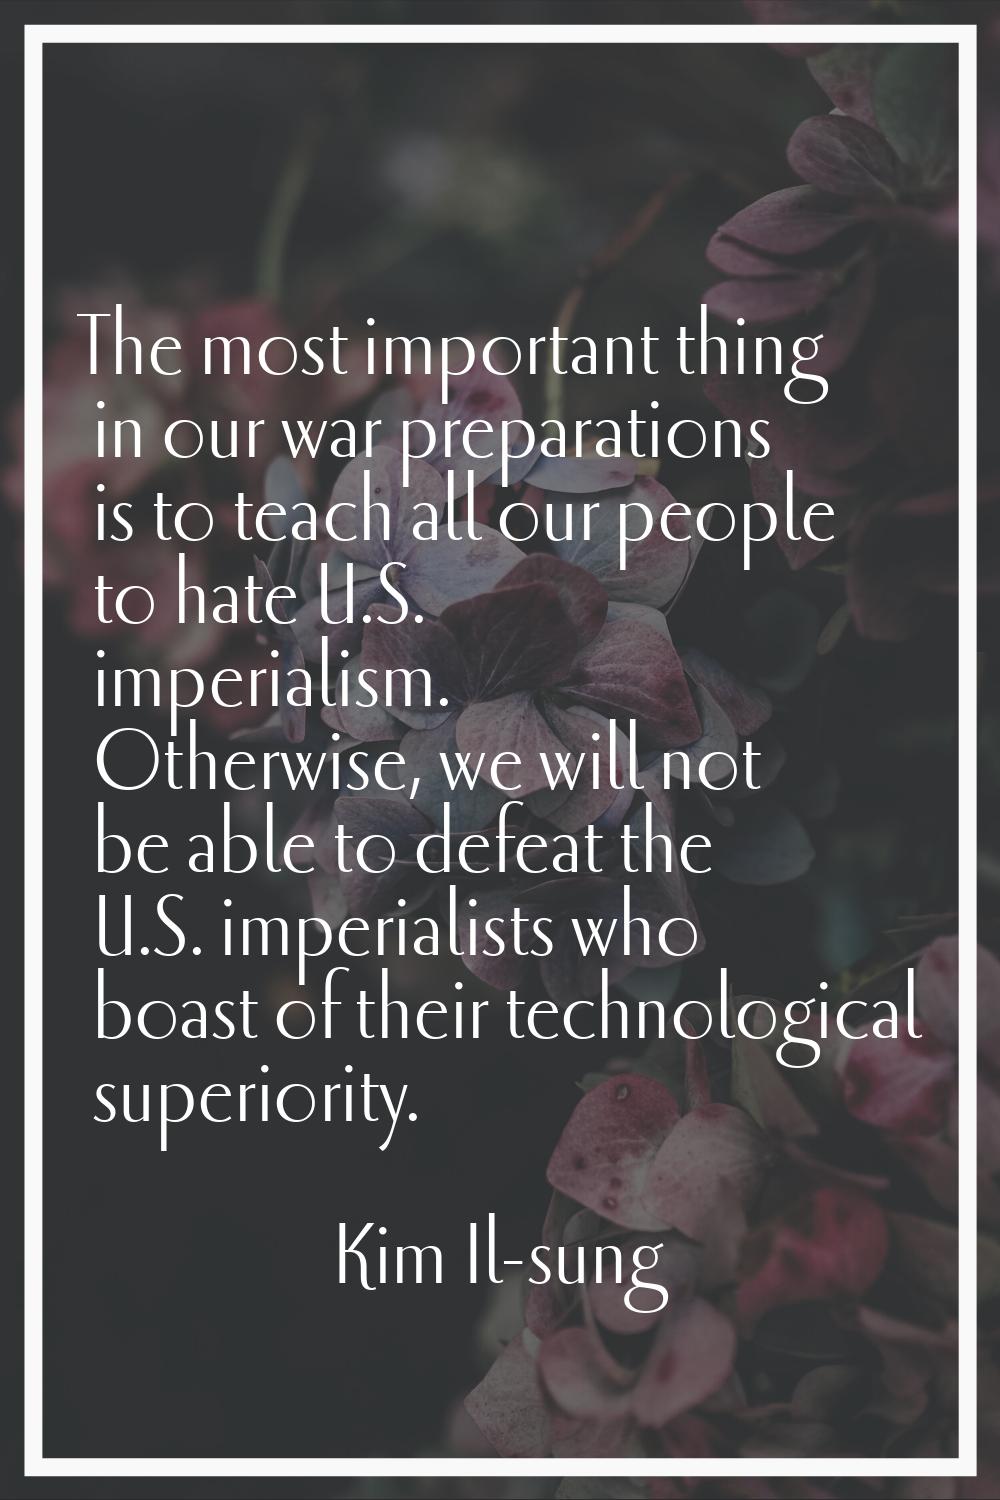 The most important thing in our war preparations is to teach all our people to hate U.S. imperialis